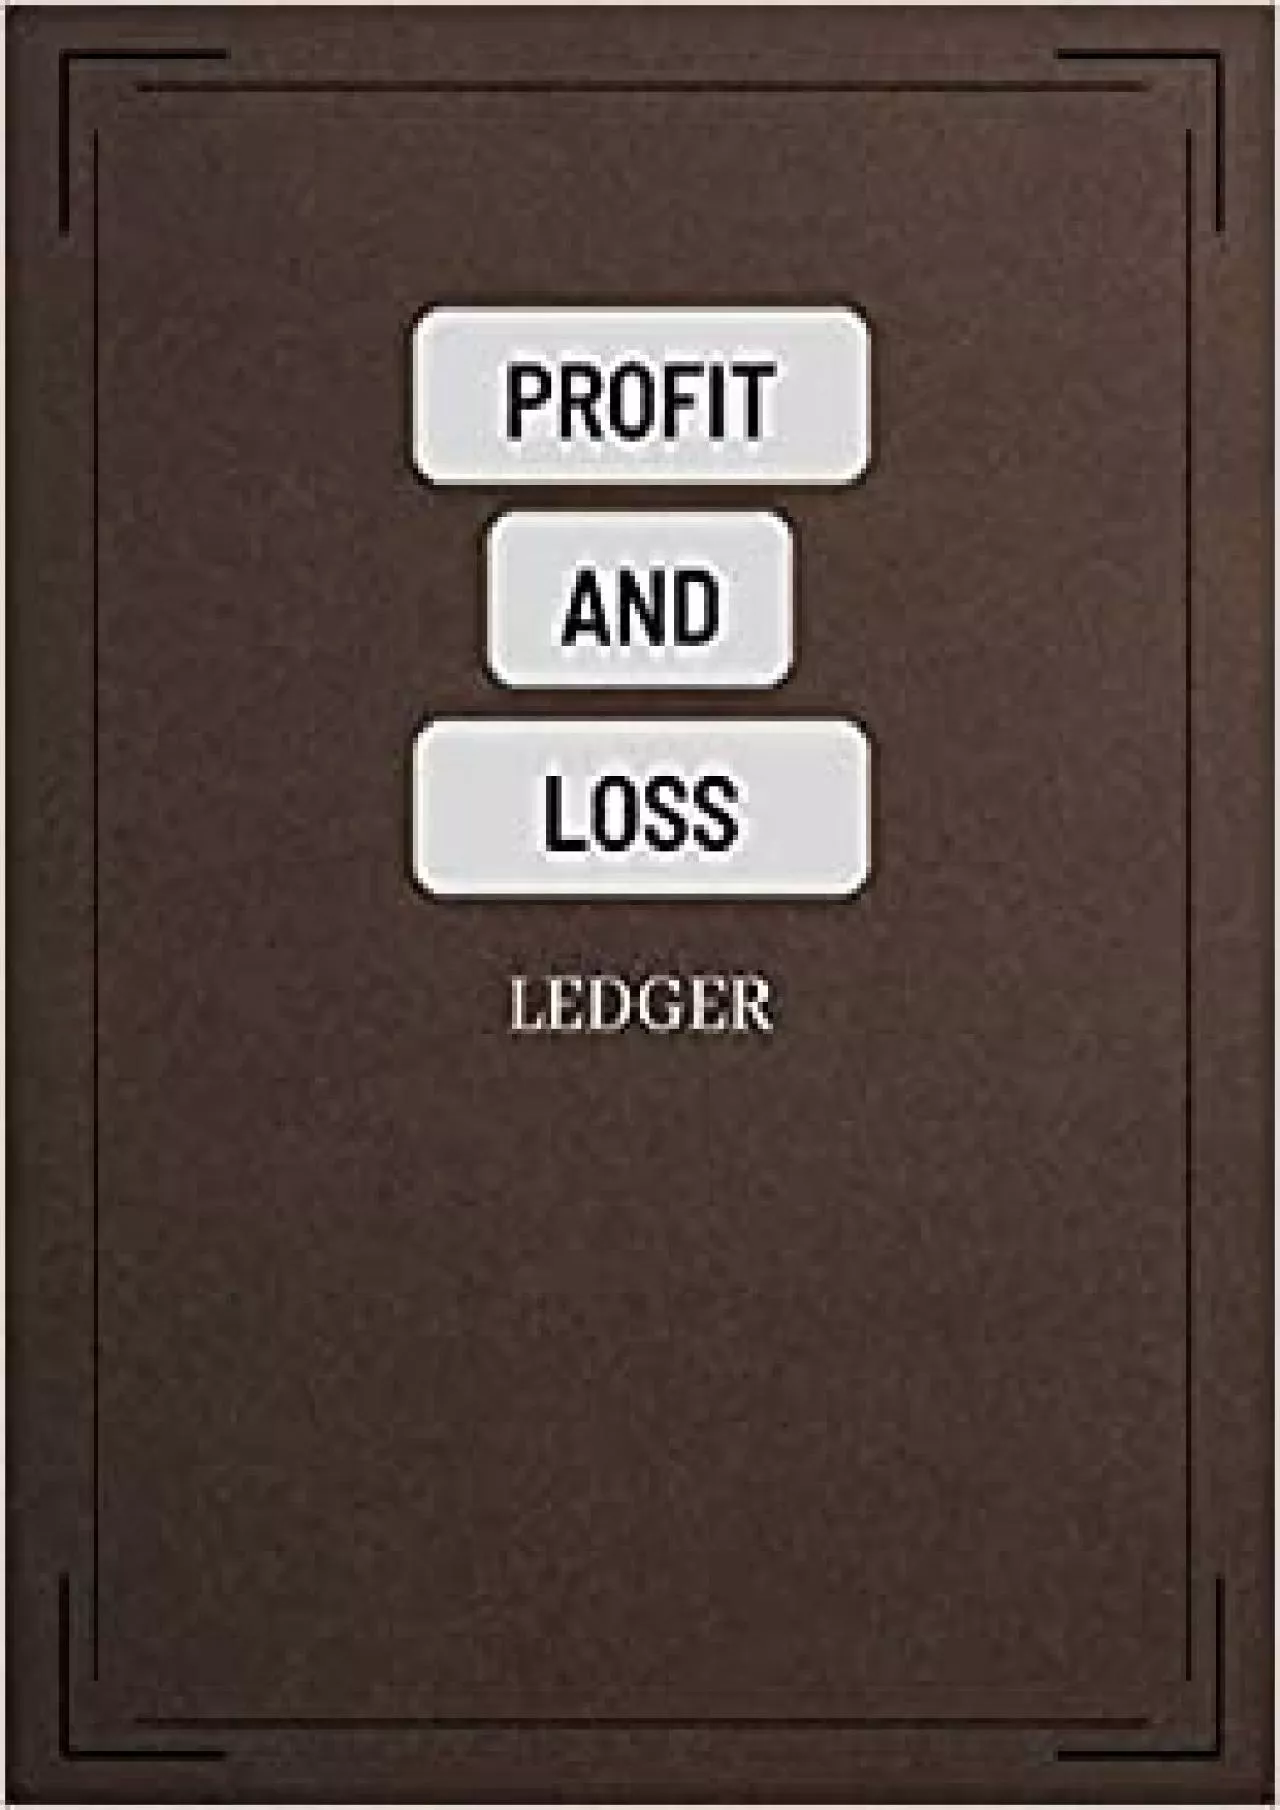 Profit and Loss Ledger: Simple Log Book for Bookkeeping Small Business or household finance